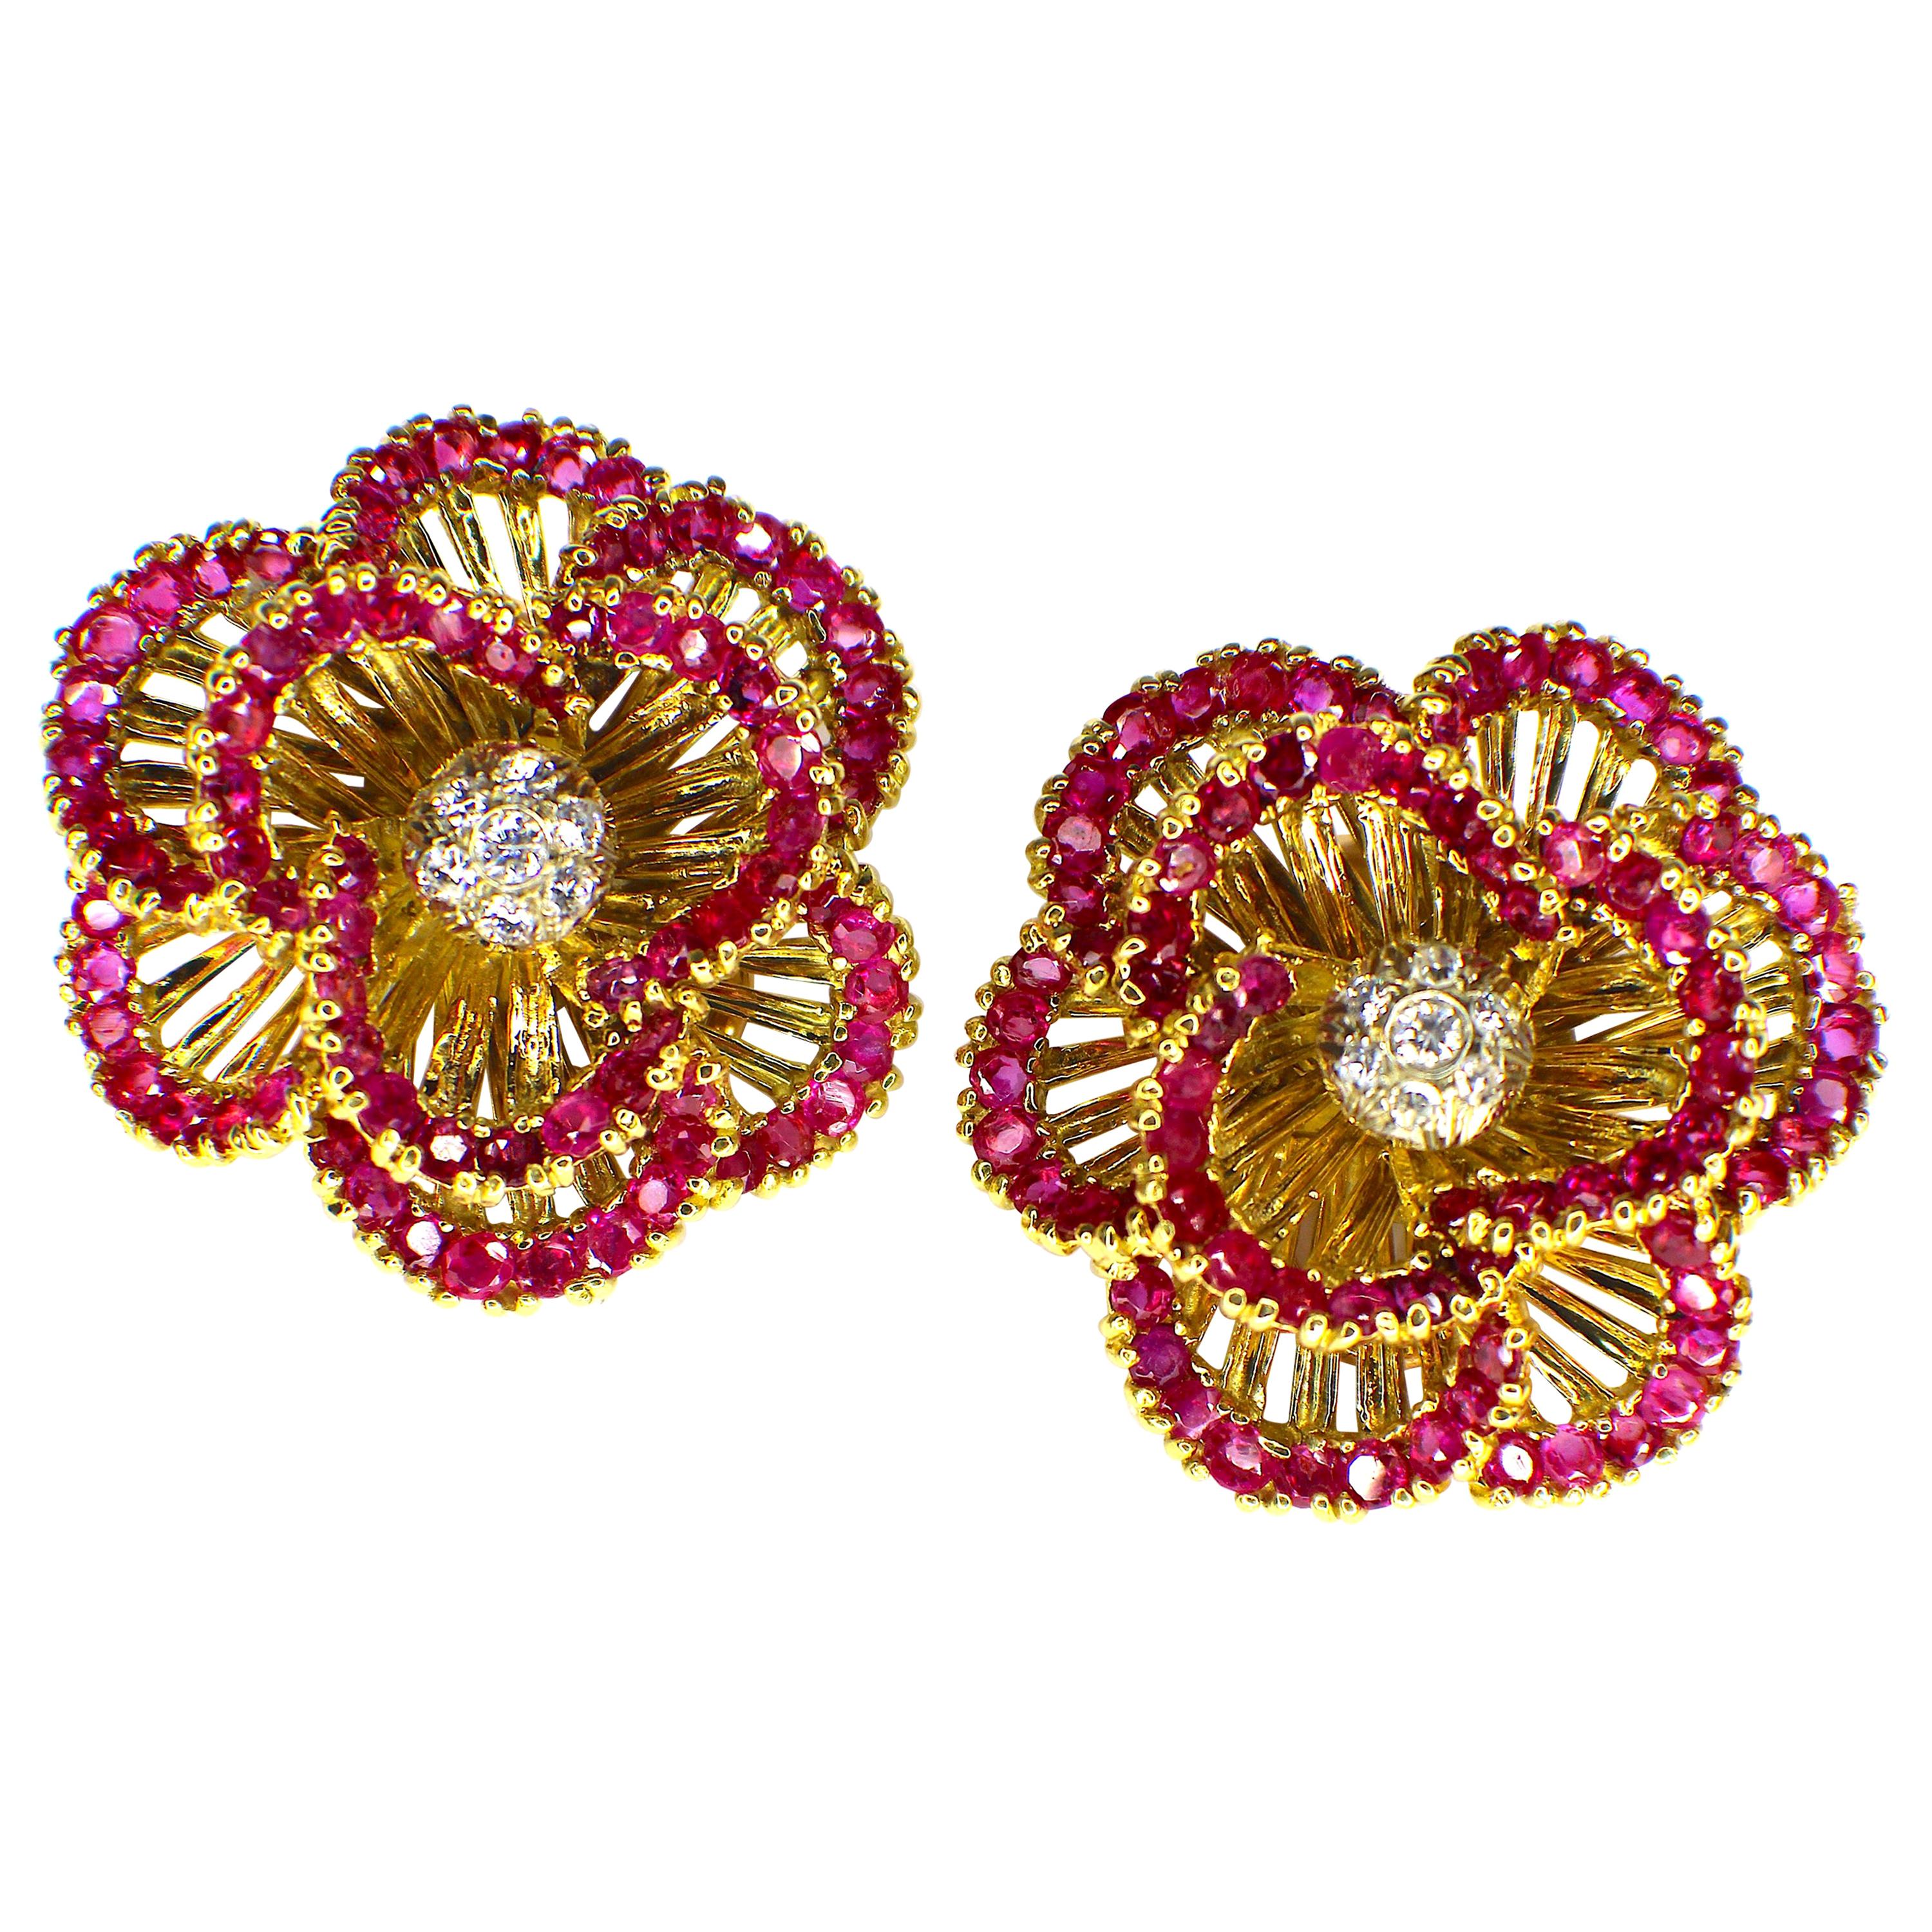 Gemolithos Tiffany & Co. Signed Ruby and Diamond Earclips, 1960s